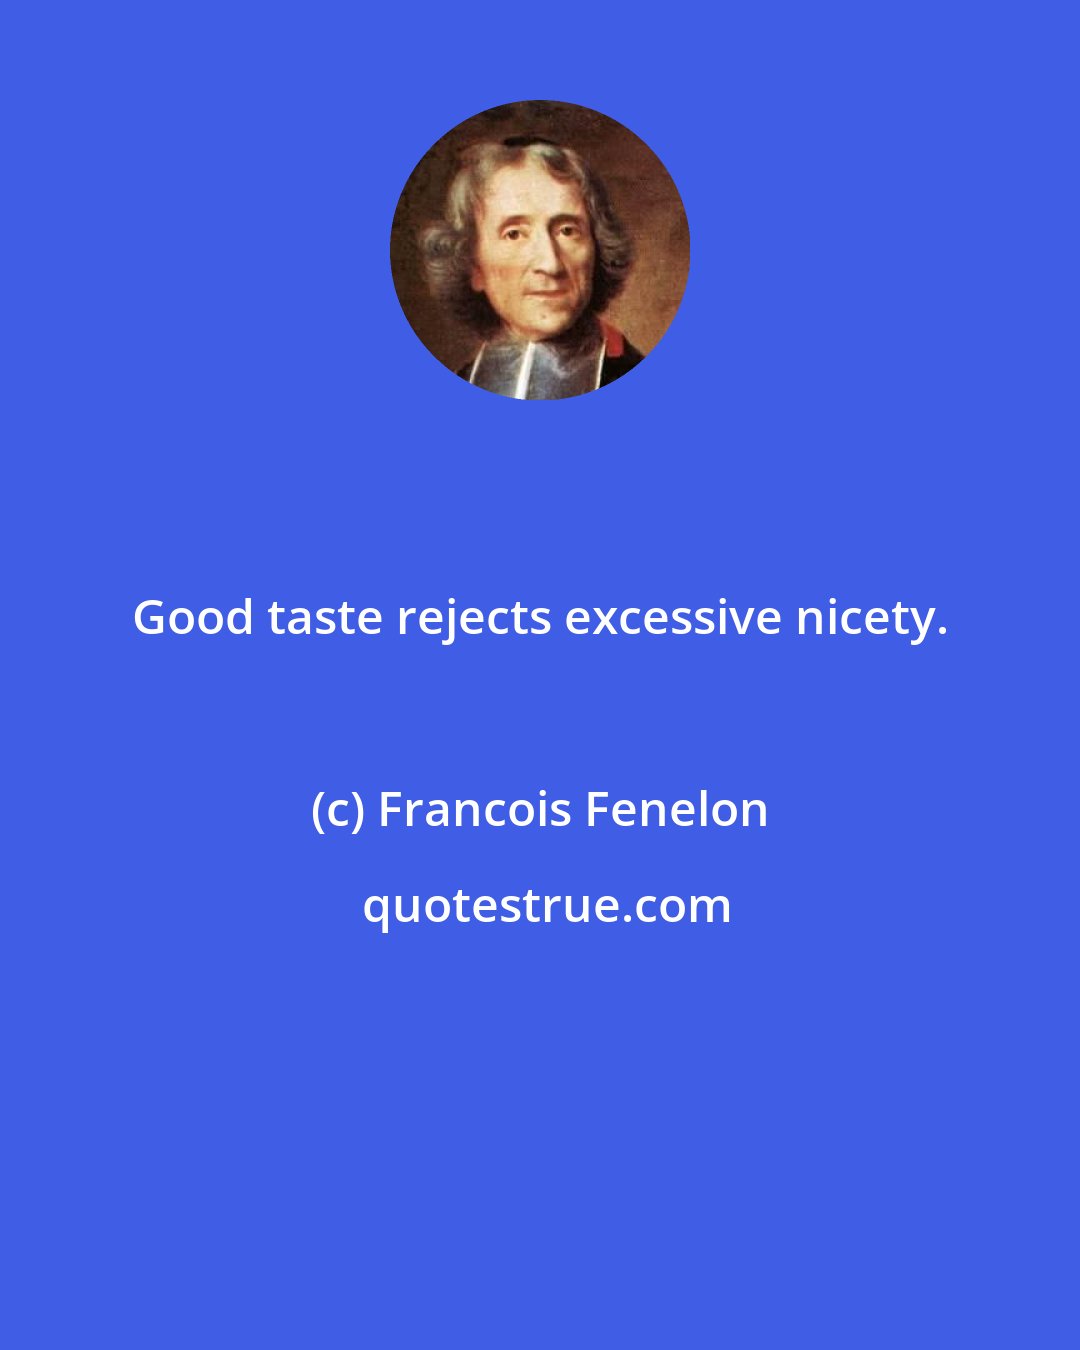 Francois Fenelon: Good taste rejects excessive nicety.